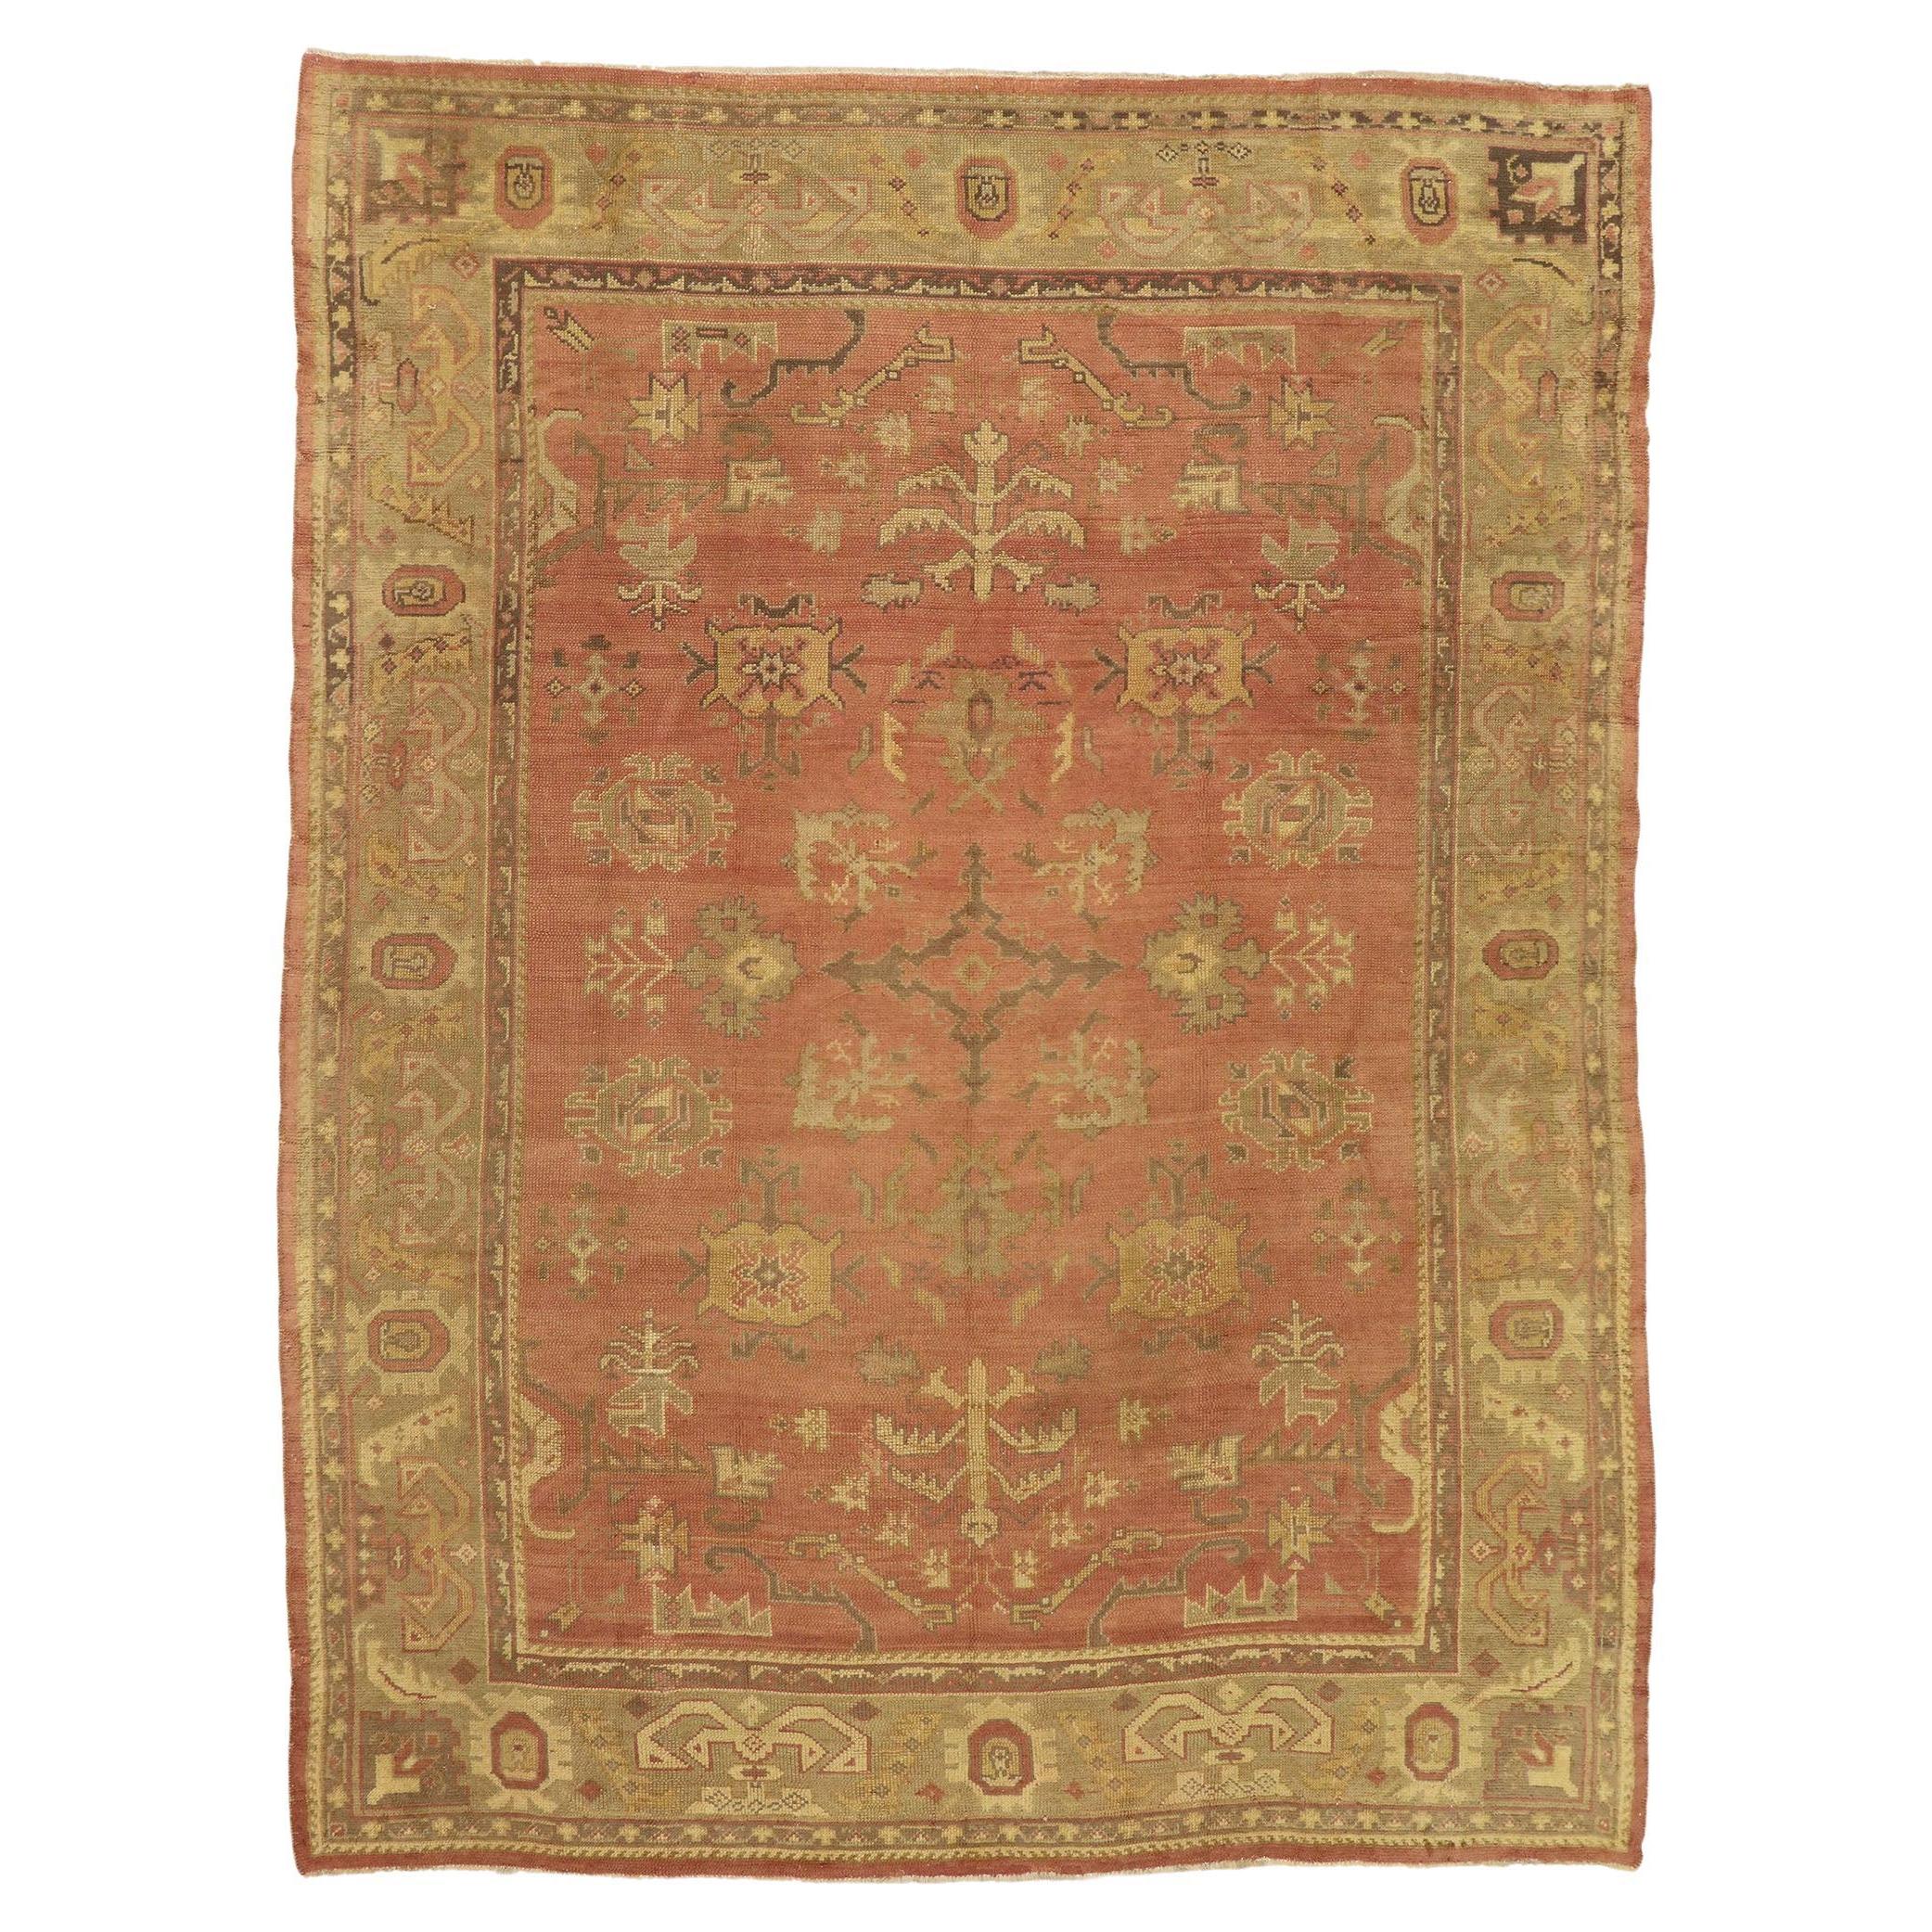 Antique Turkish Oushak Rug with Rustic Belgian Arts and Crafts Style